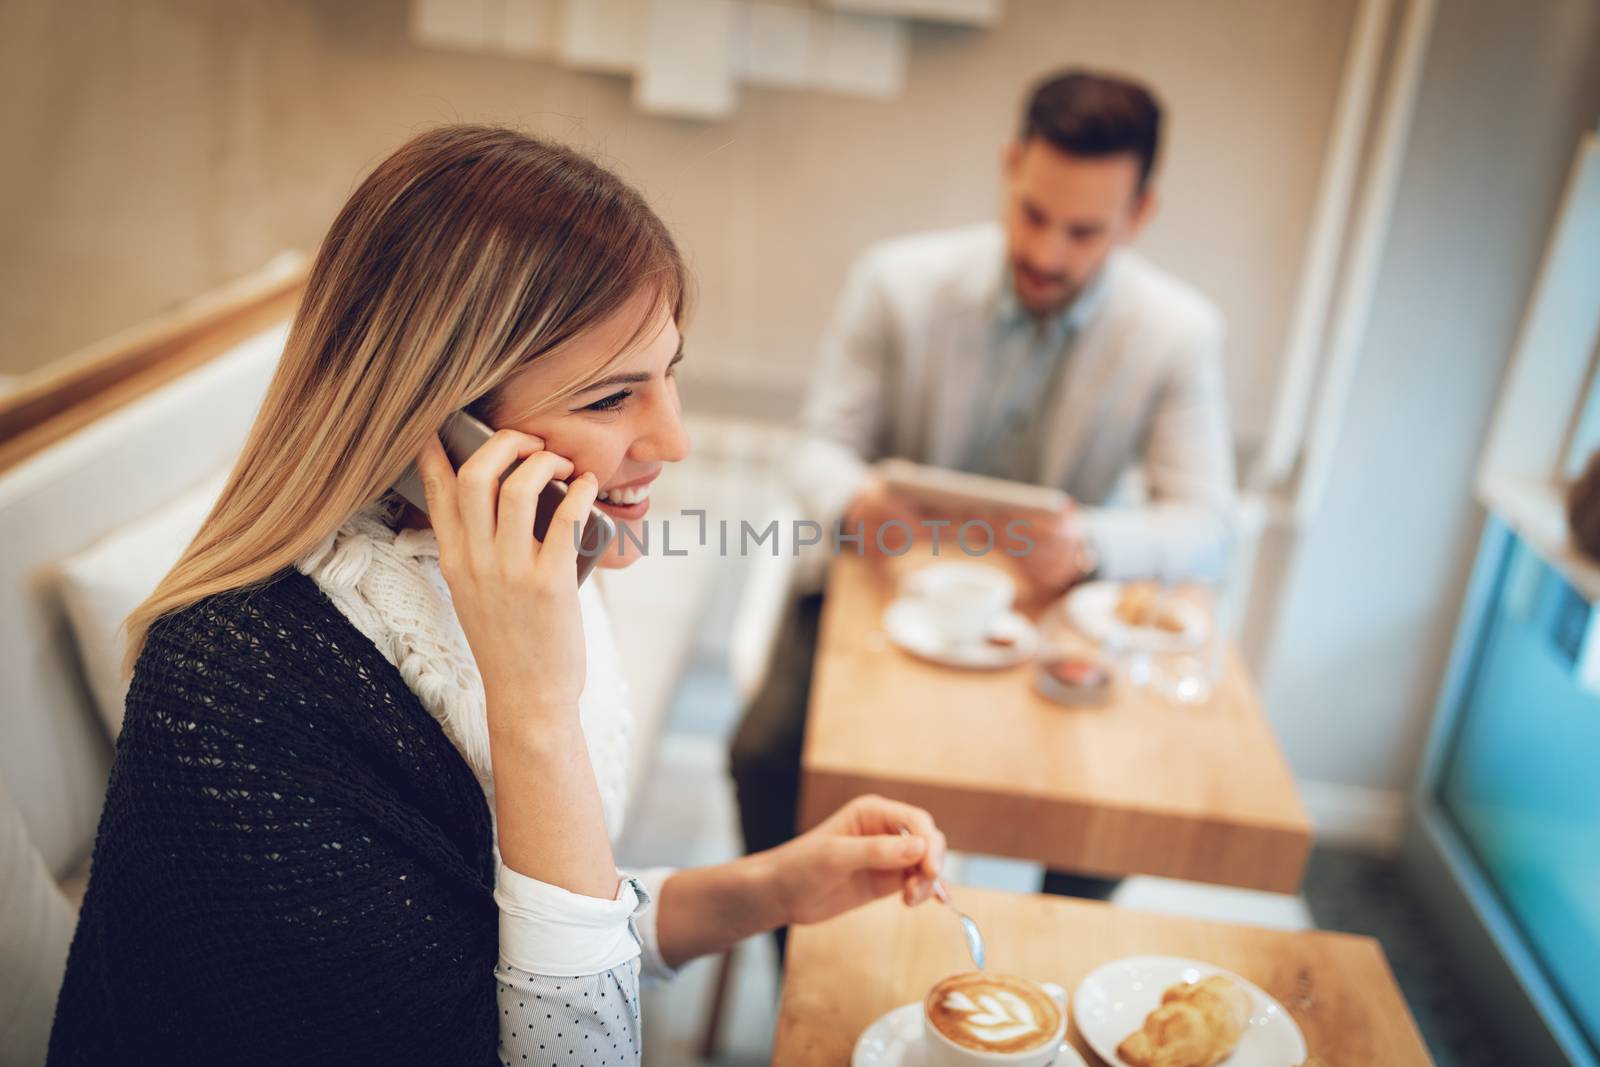 Beautiful young smiling woman using smartphone and drinking coffee in a cafe. Selective focus. Focus on businesswoman.